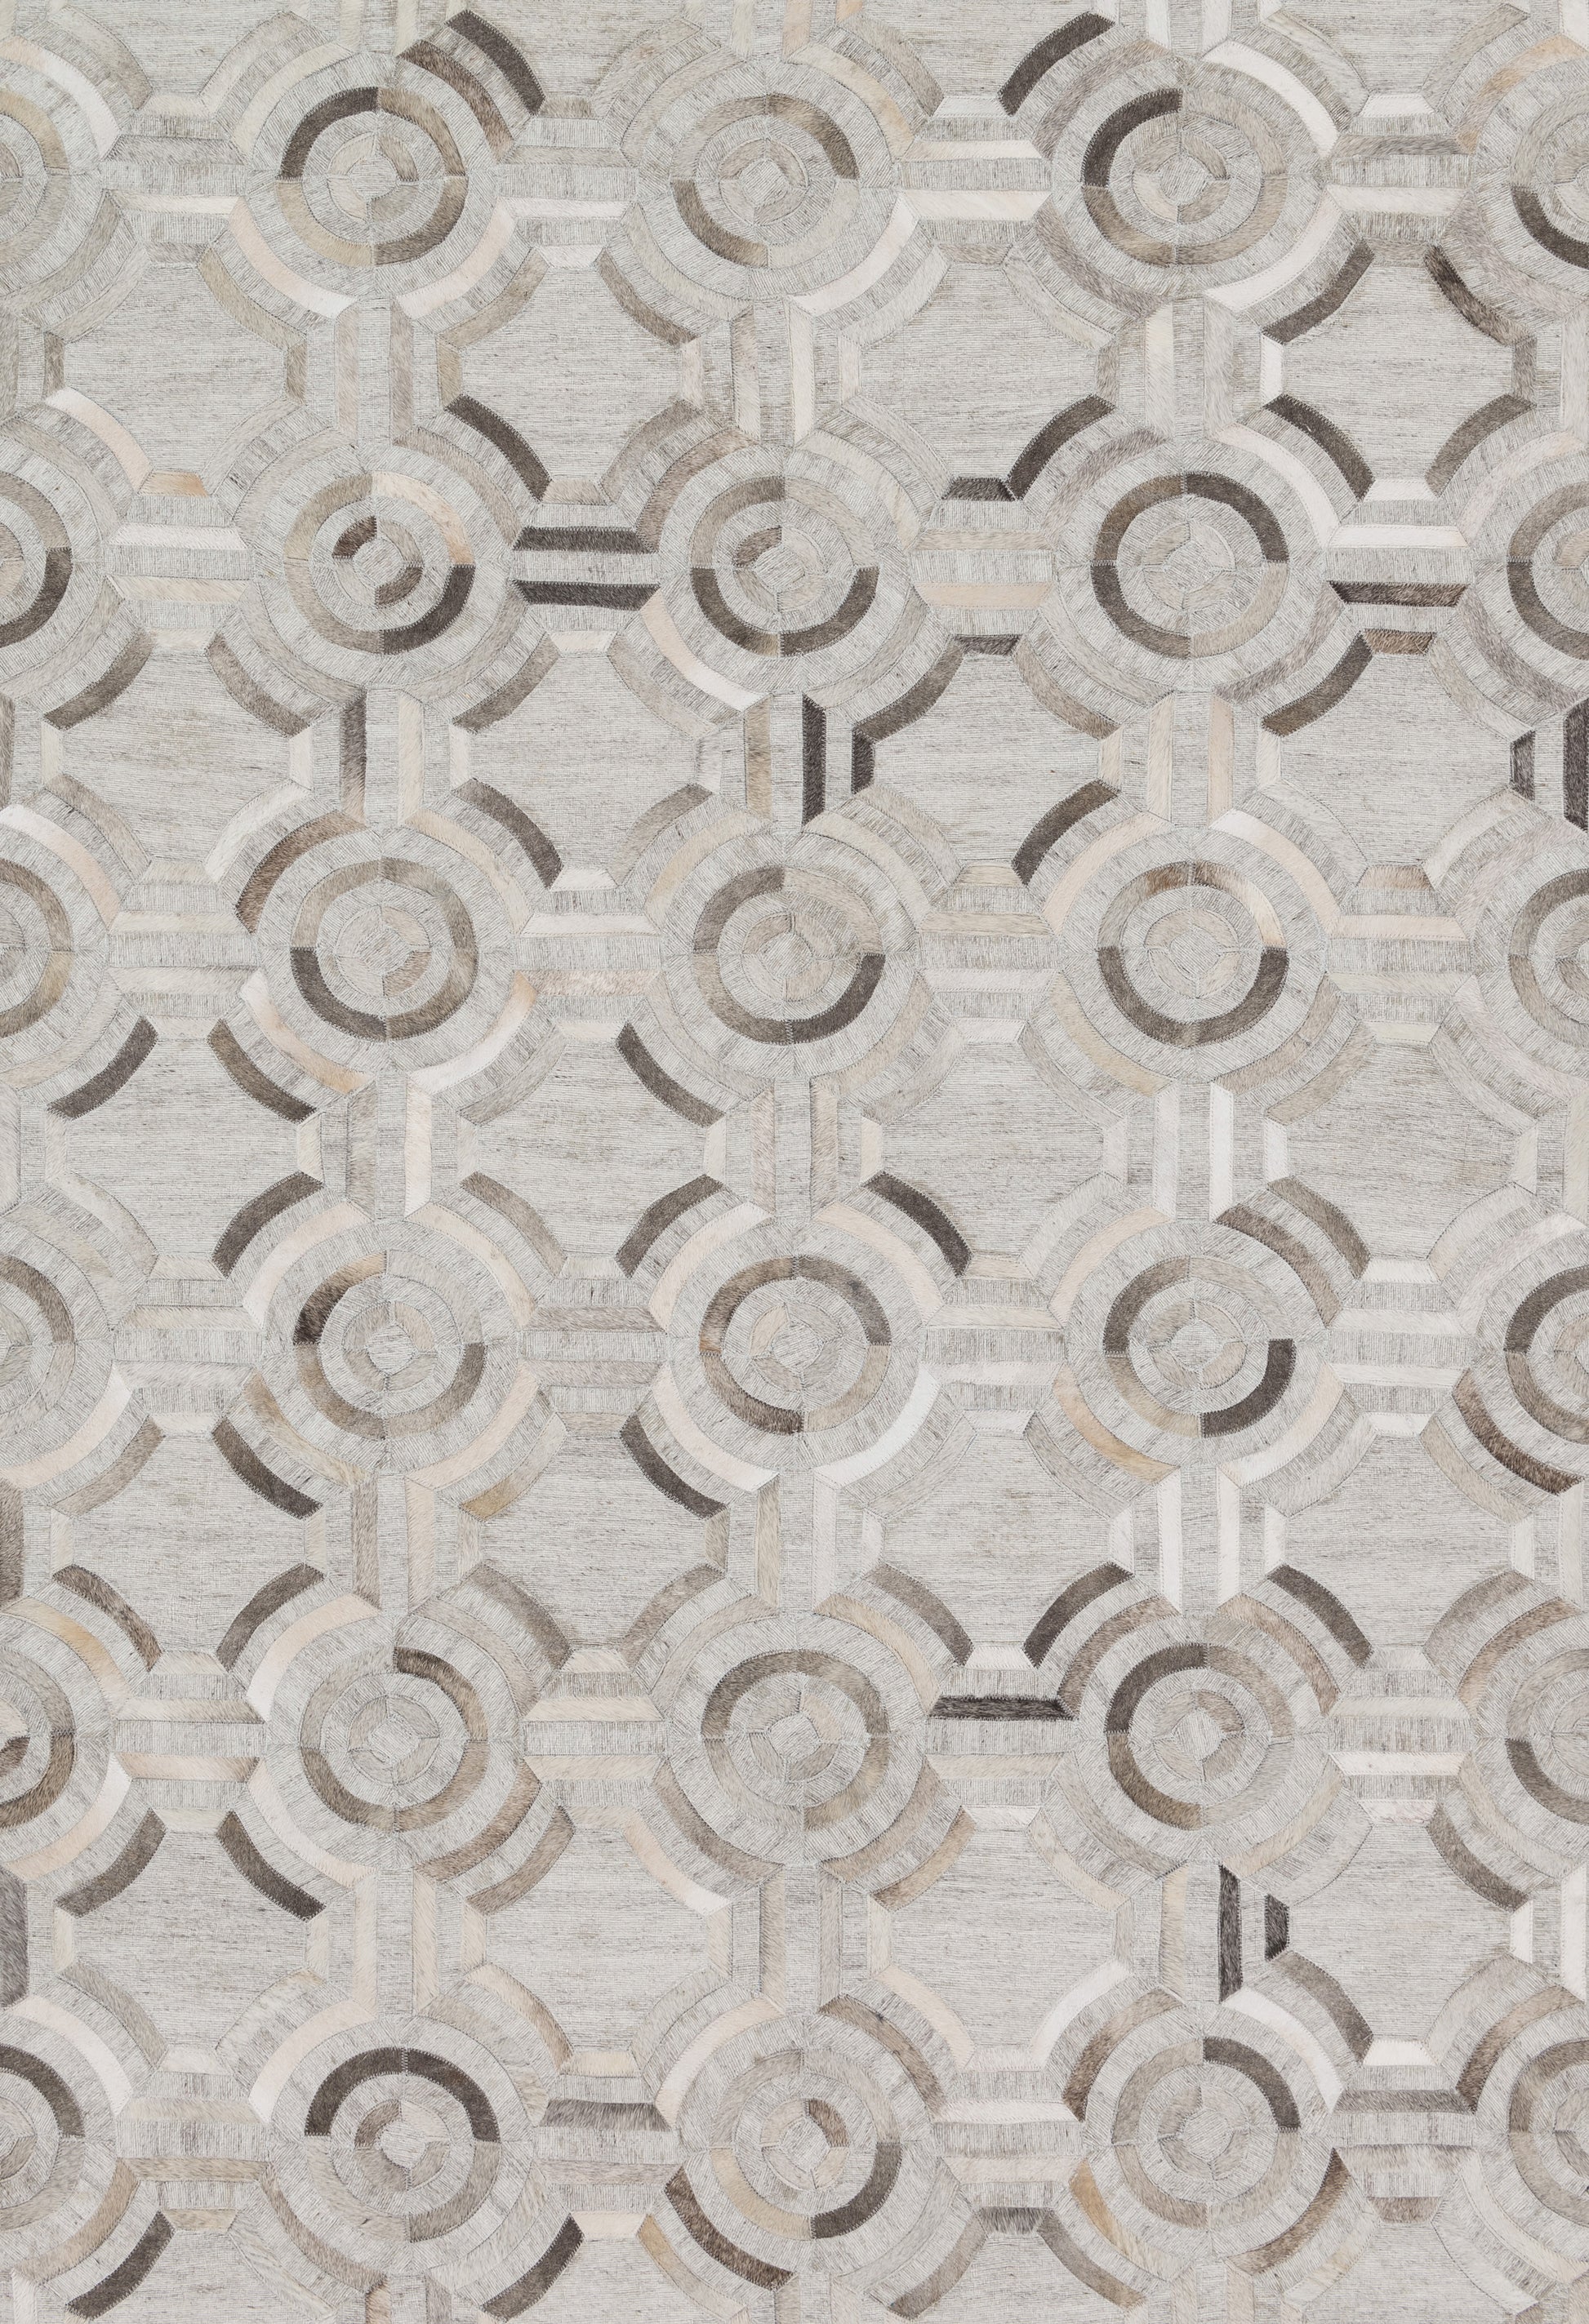 A picture of Loloi's Dorado rug, in style DB-05, color Grey / Grey